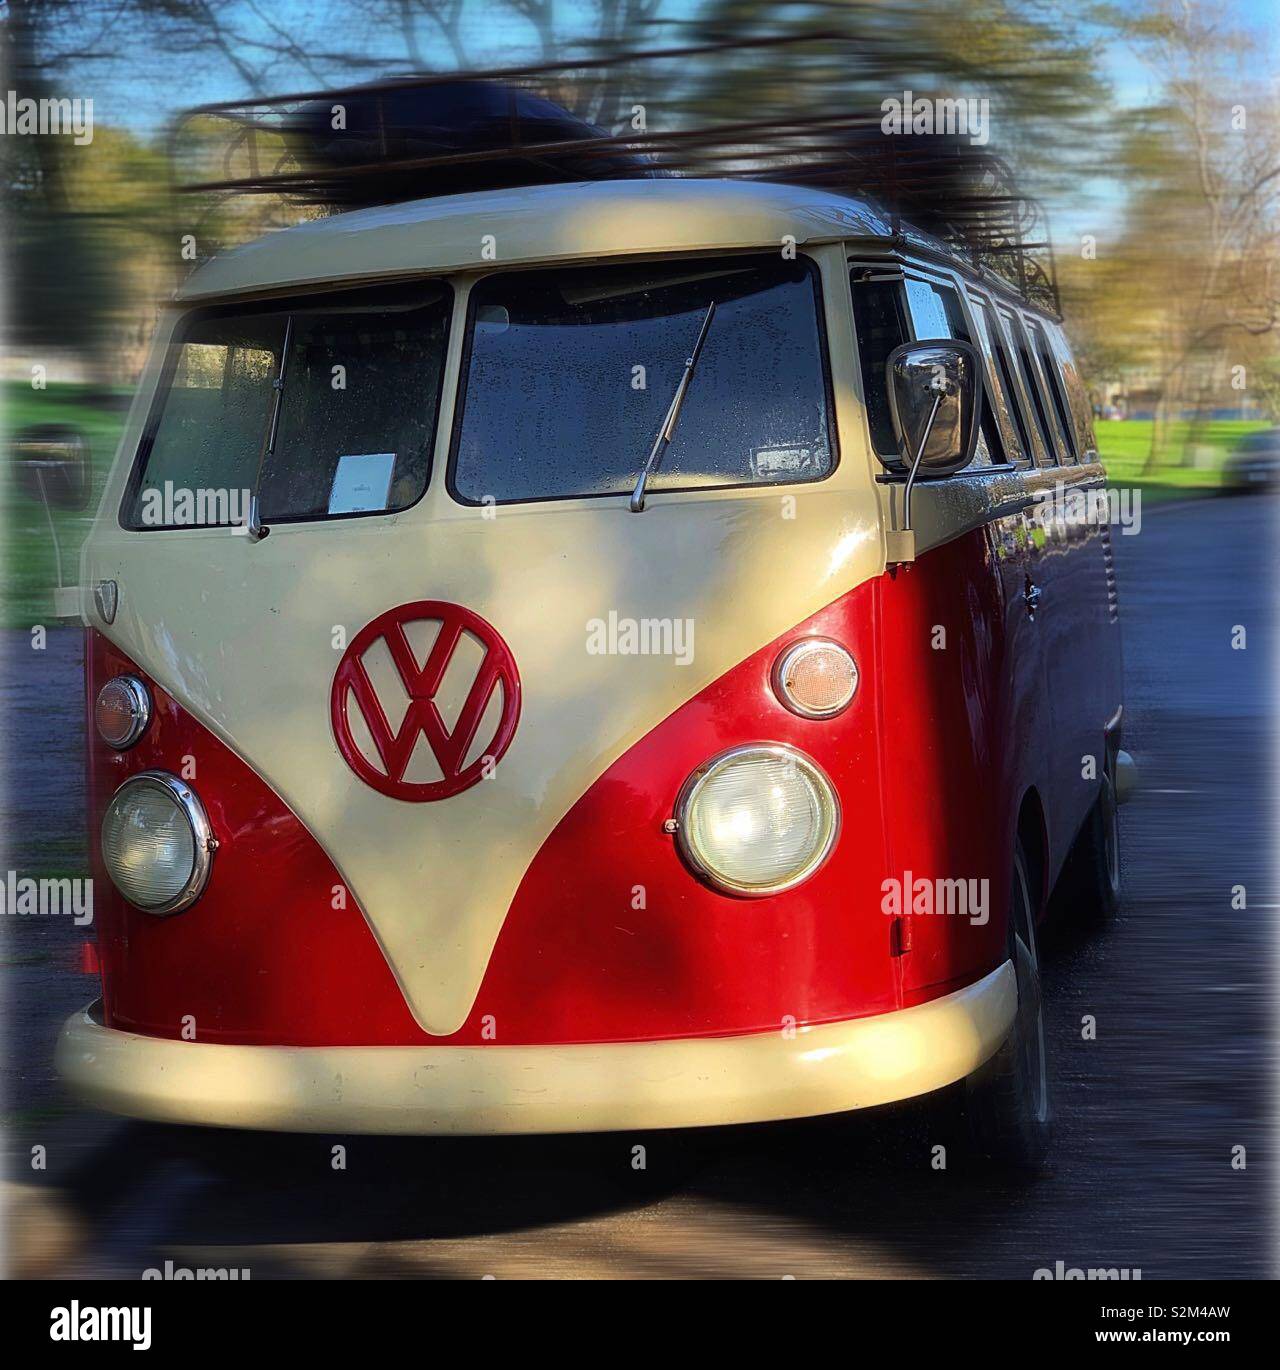 The classical model of Volkswagen van in red and oyster colour Stock Photo  - Alamy